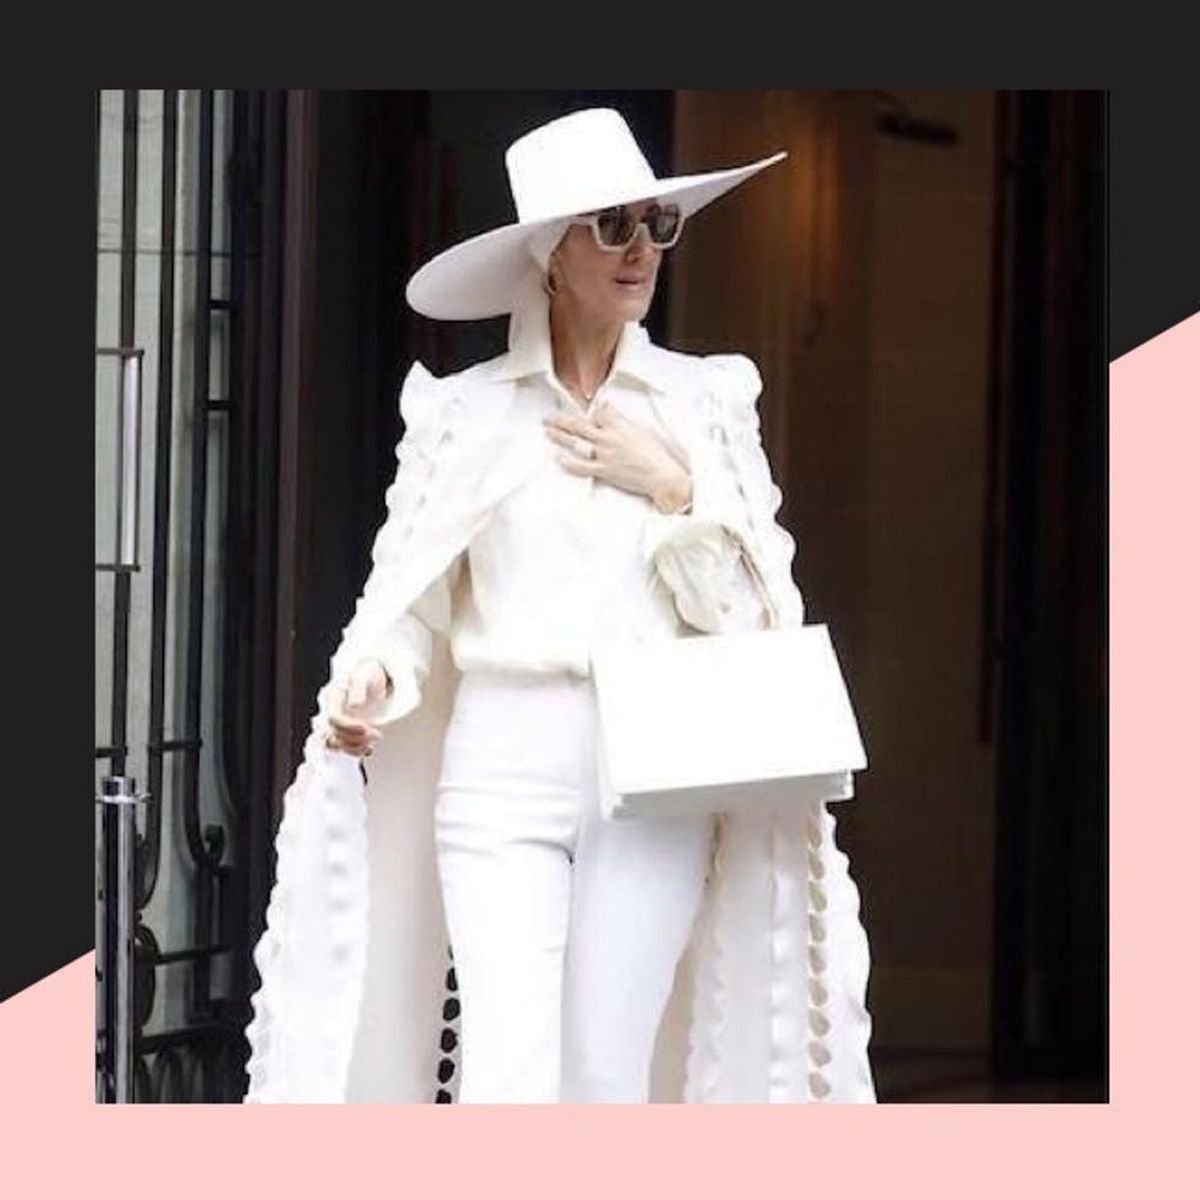 Celine Dion Is Killing the Fashion Game and We Need to Talk About It